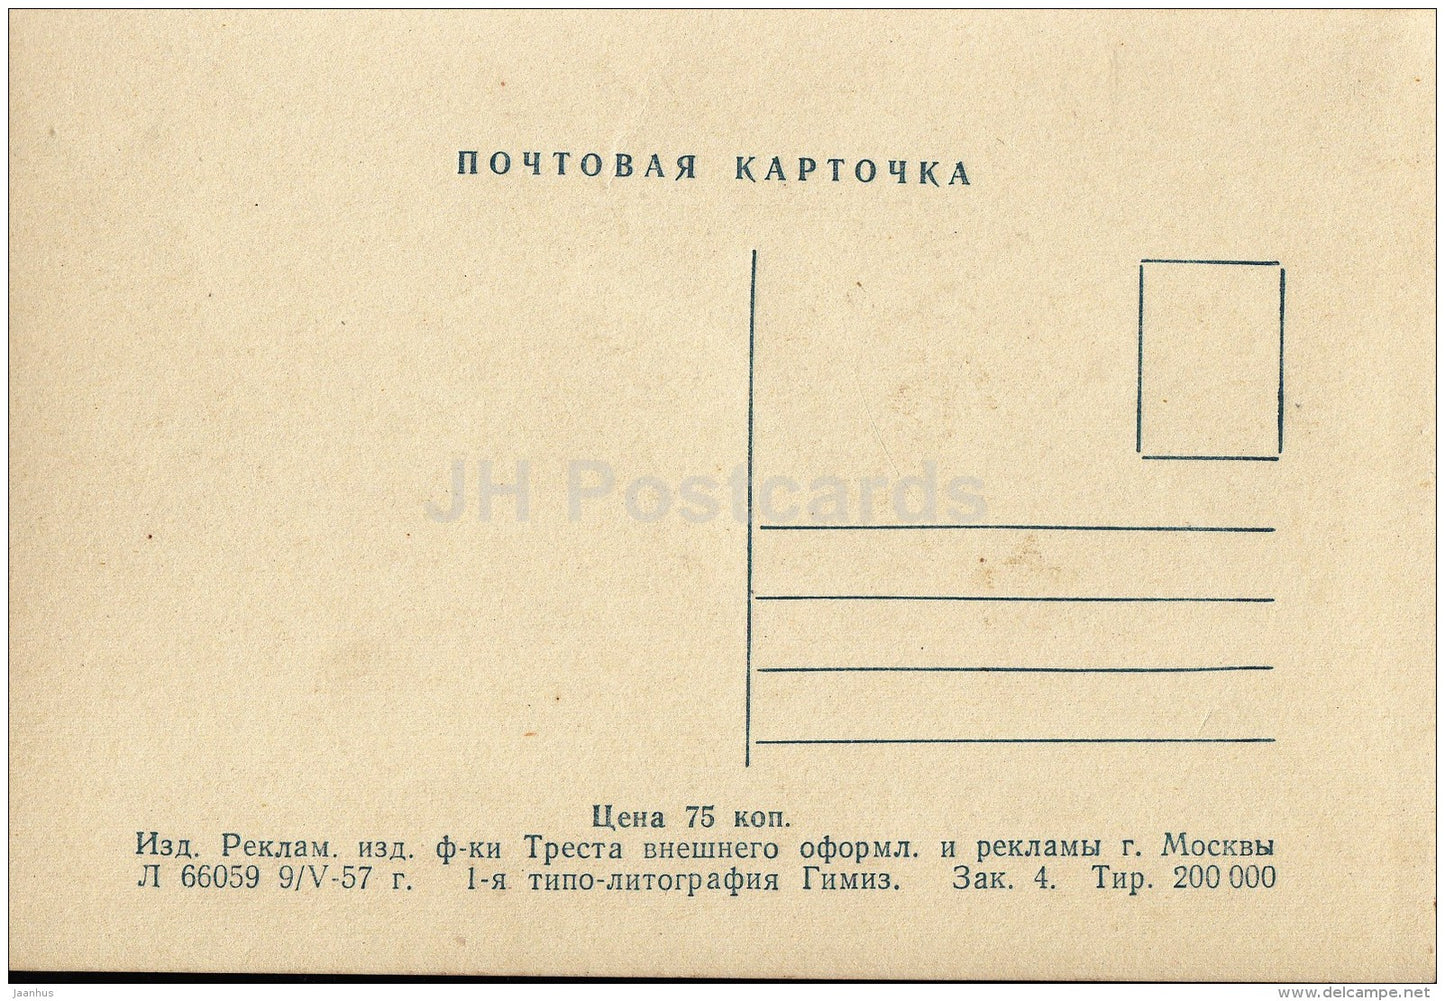 Lenin Museum - Moscow - 1957 - Russia USSR - unused - JH Postcards